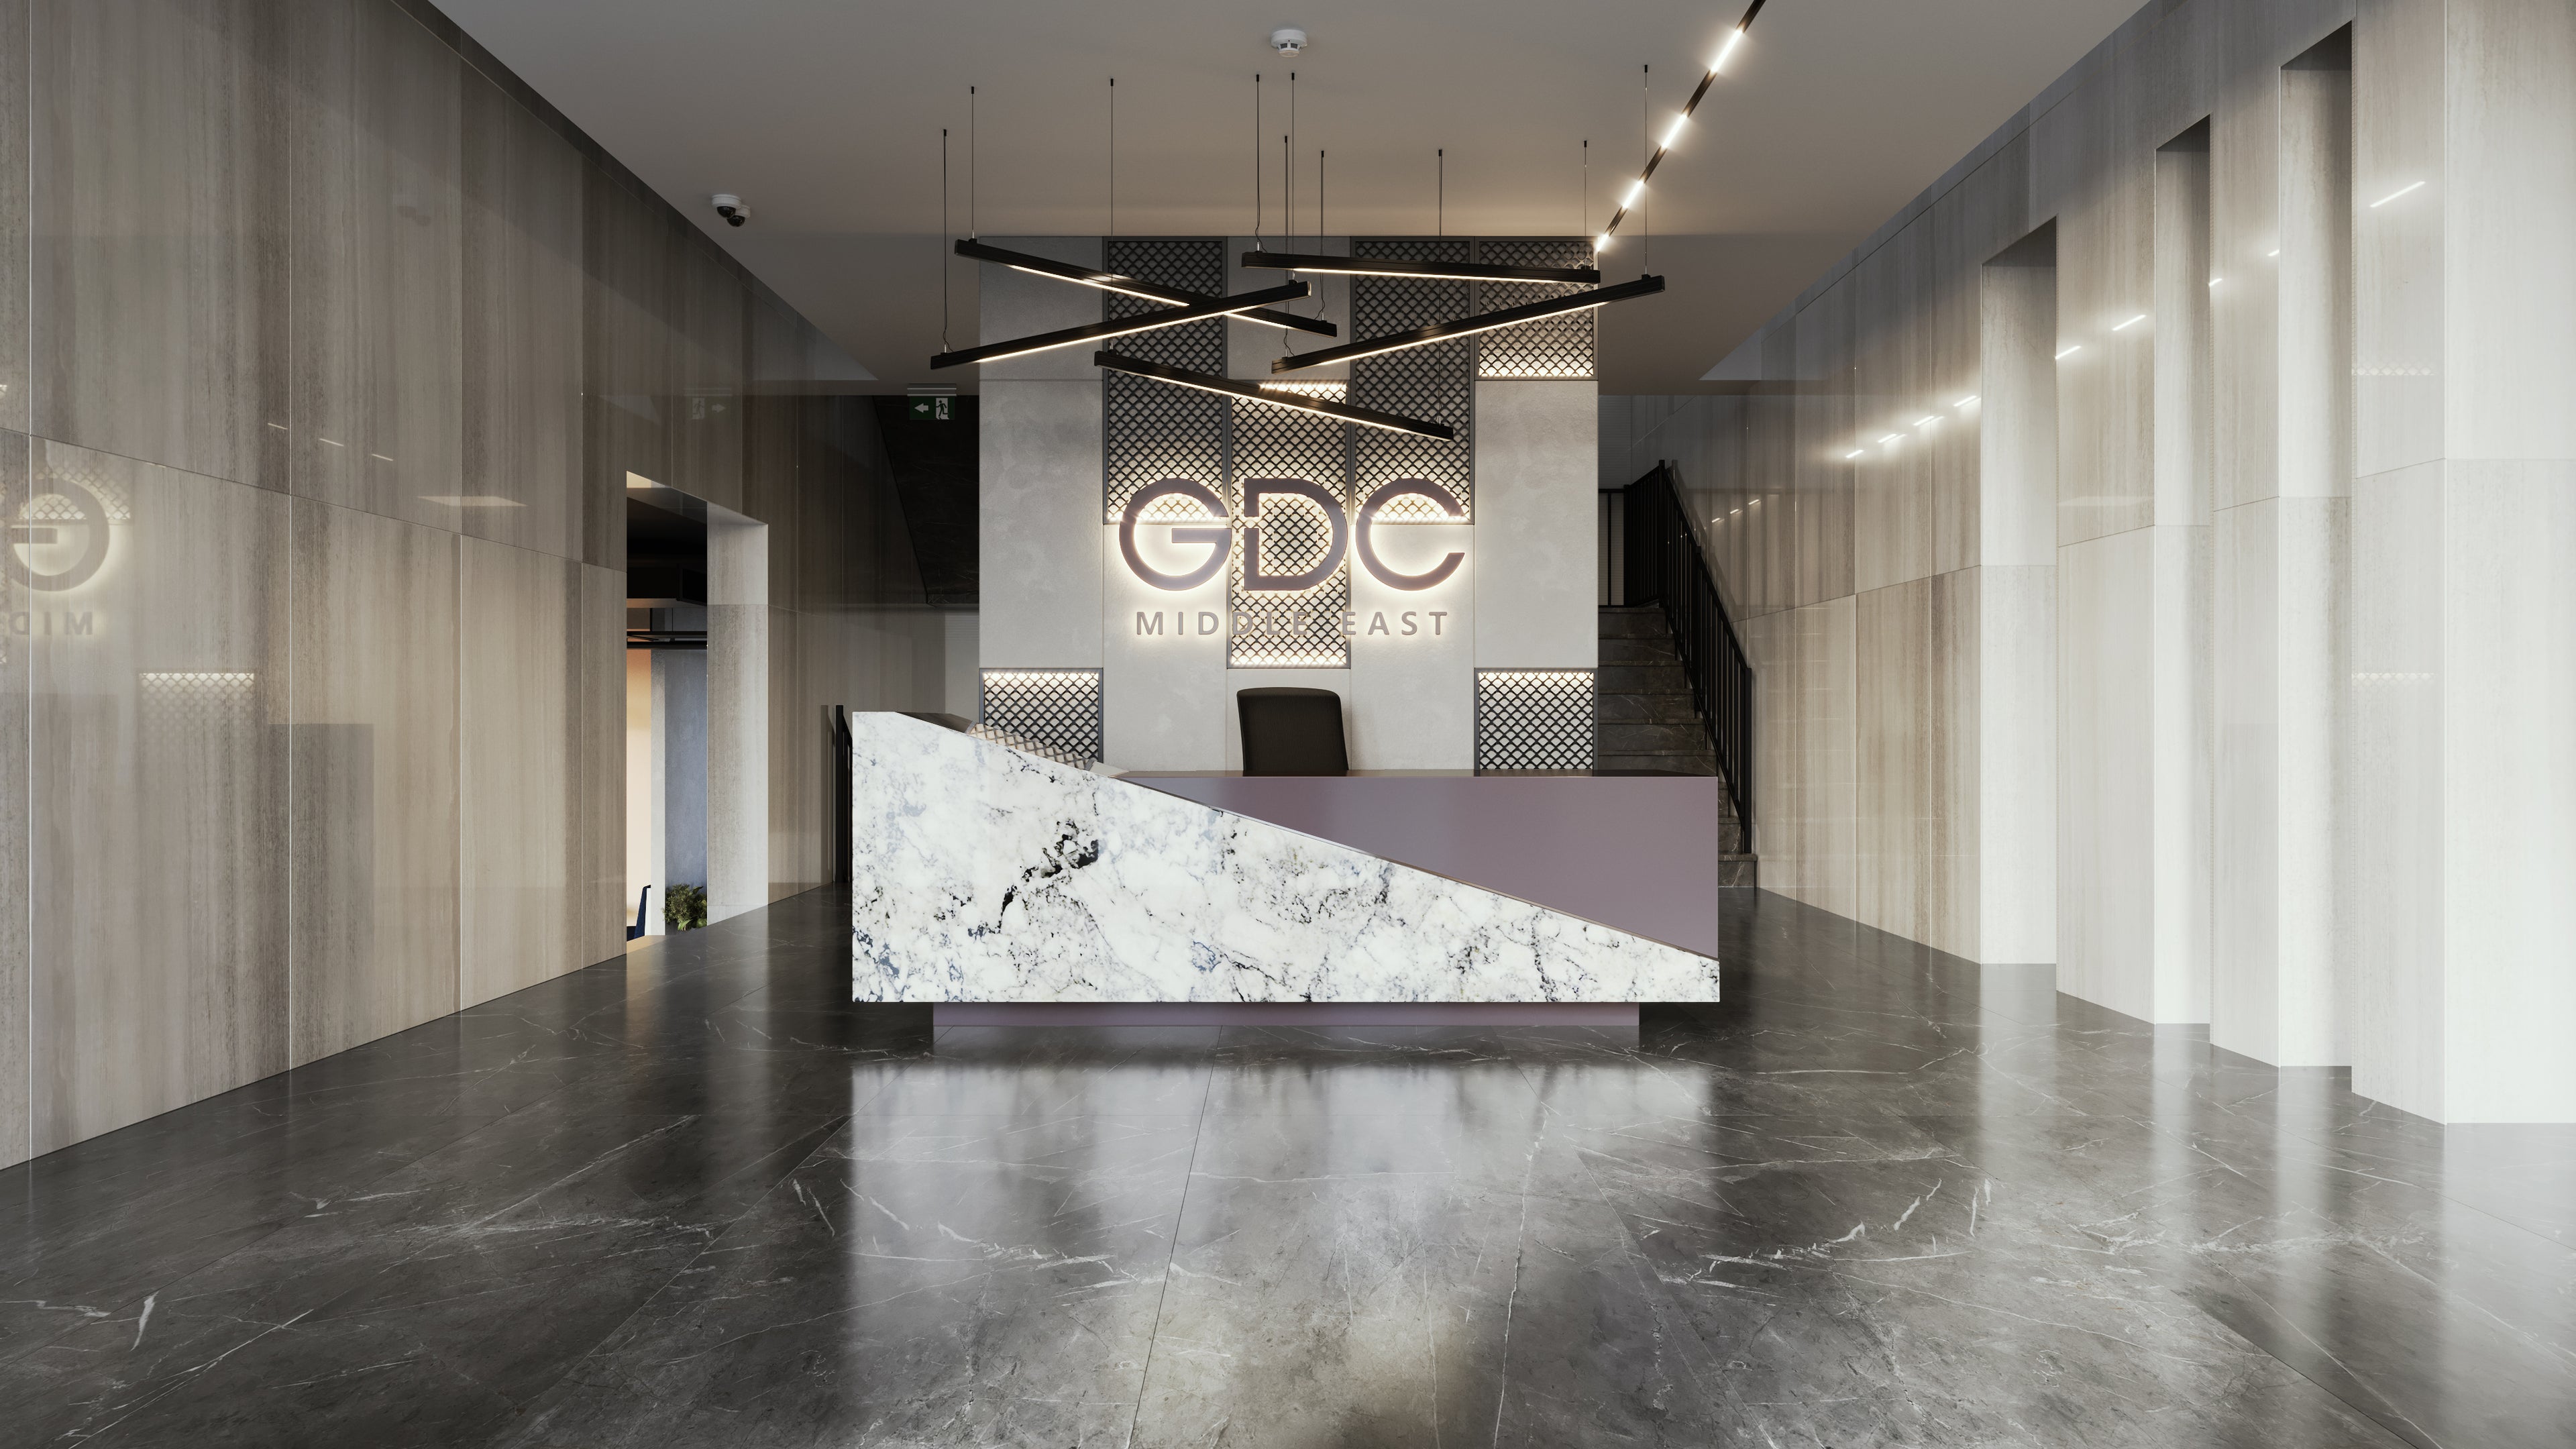 Office Interior Design Project for GDC By Atelier 21 KSA